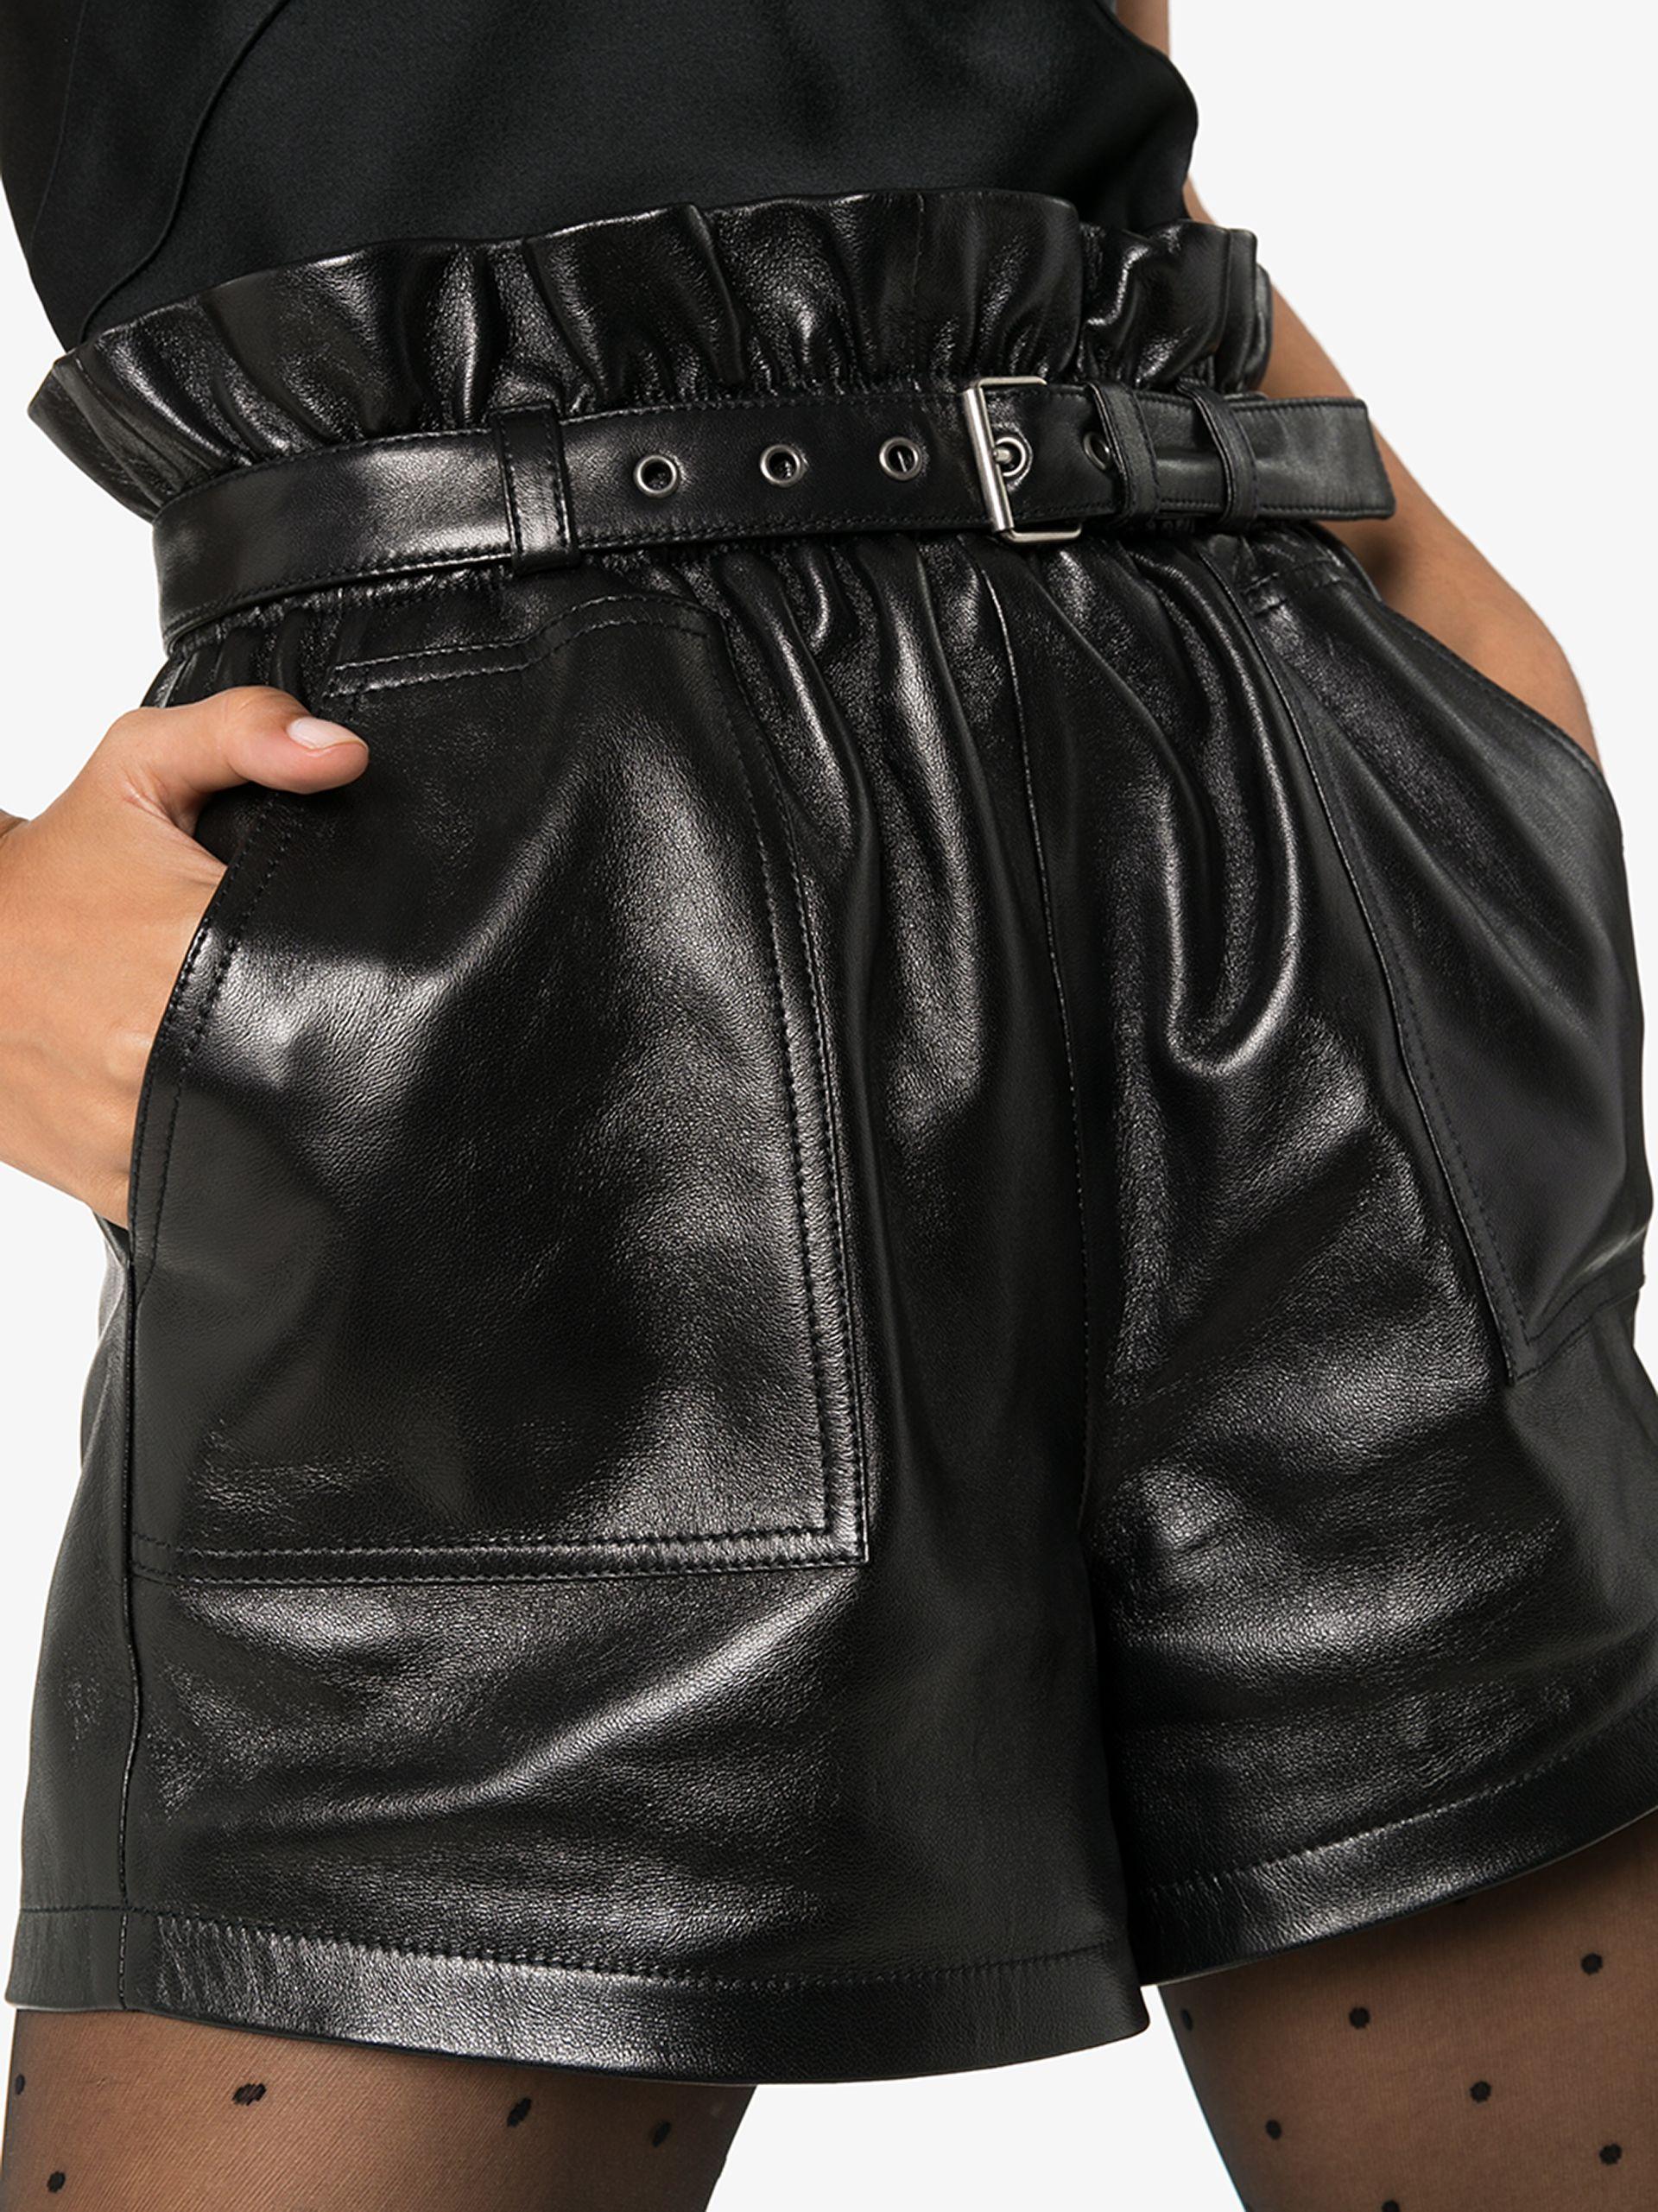 Women's Saint Laurent Black High Waisted Belted Leather Shorts Size 38 NWT For Sale